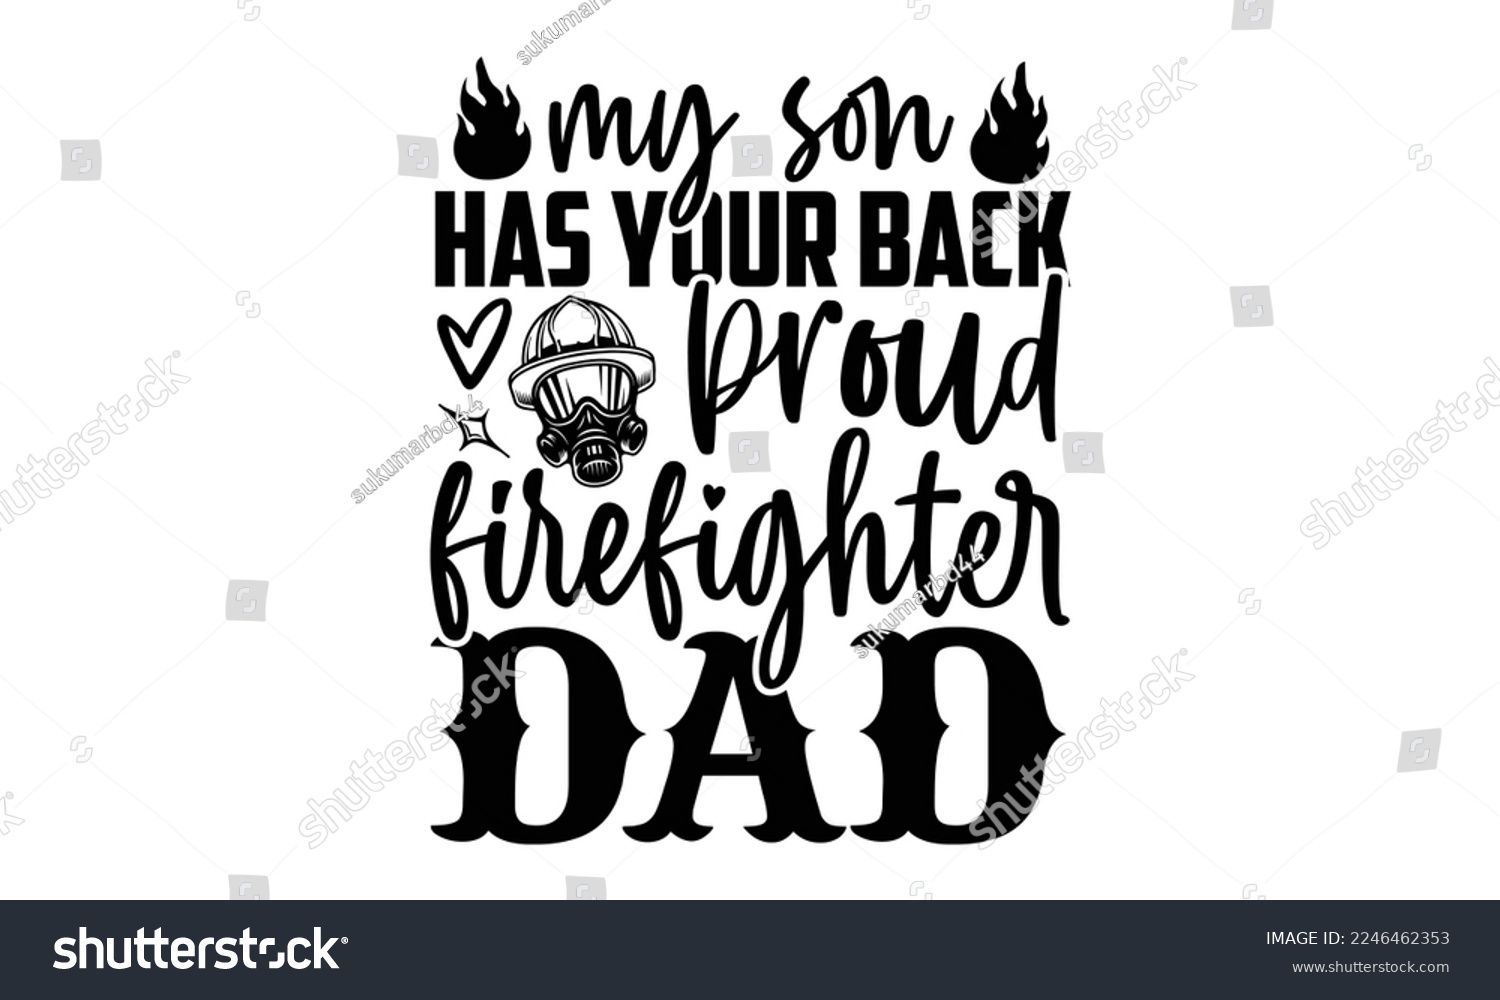 SVG of My Son Has Your Back Proud Firefighter Dad - Vector illustration with Firefighter quotes Design. Hand drawn Lettering for poster, t-shirt, card, invitation, sticker. svg for Cutting Machine, Silhouette svg